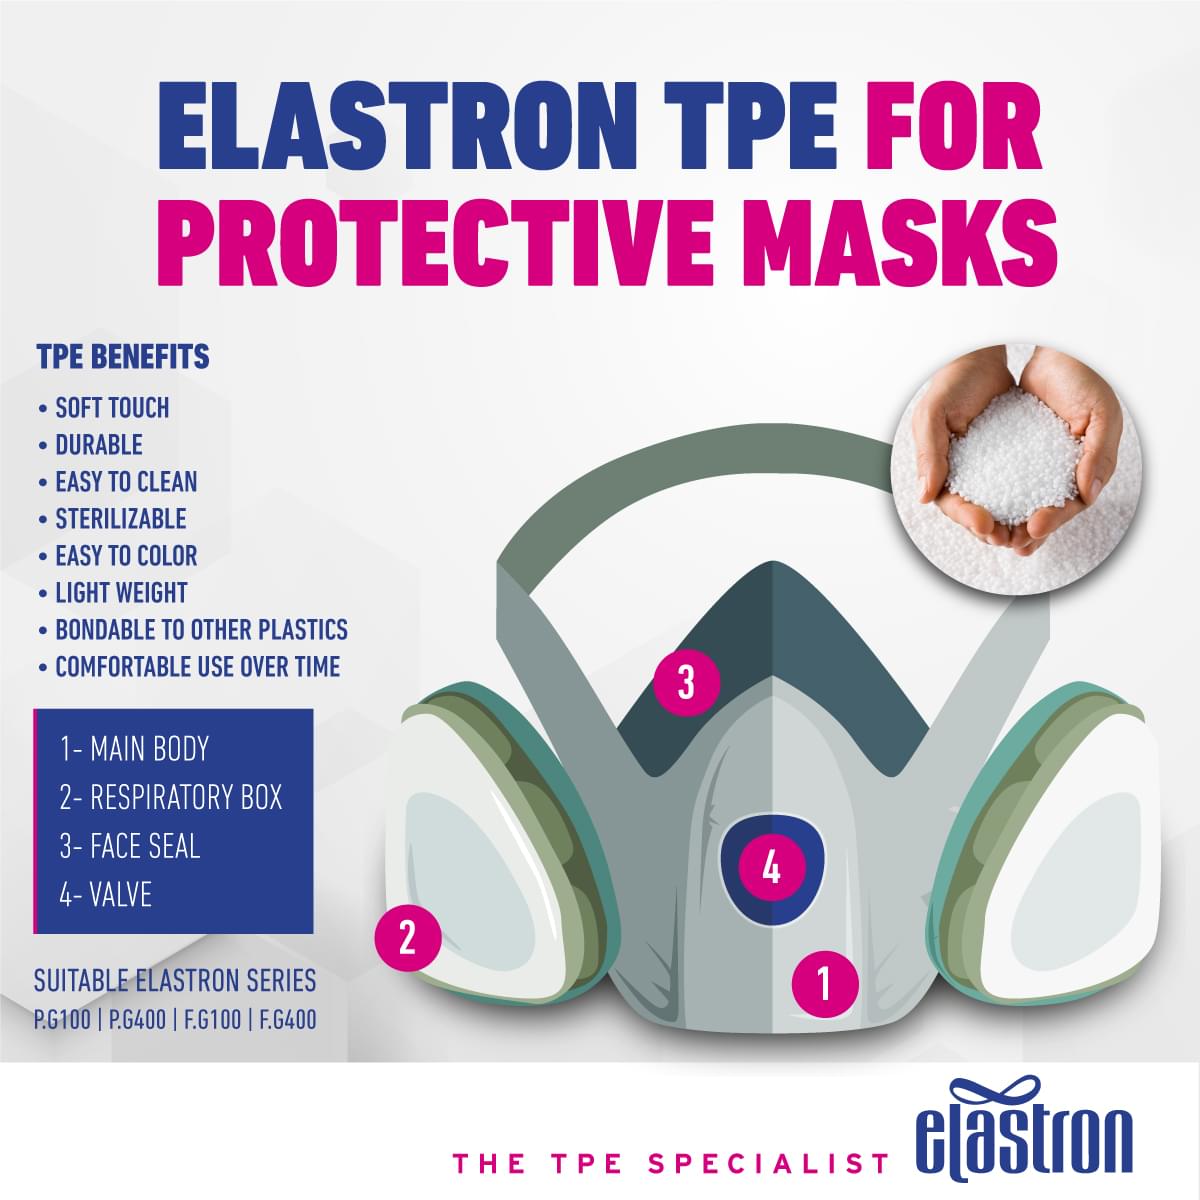 Elastron TPE for Protective Mask Press Release